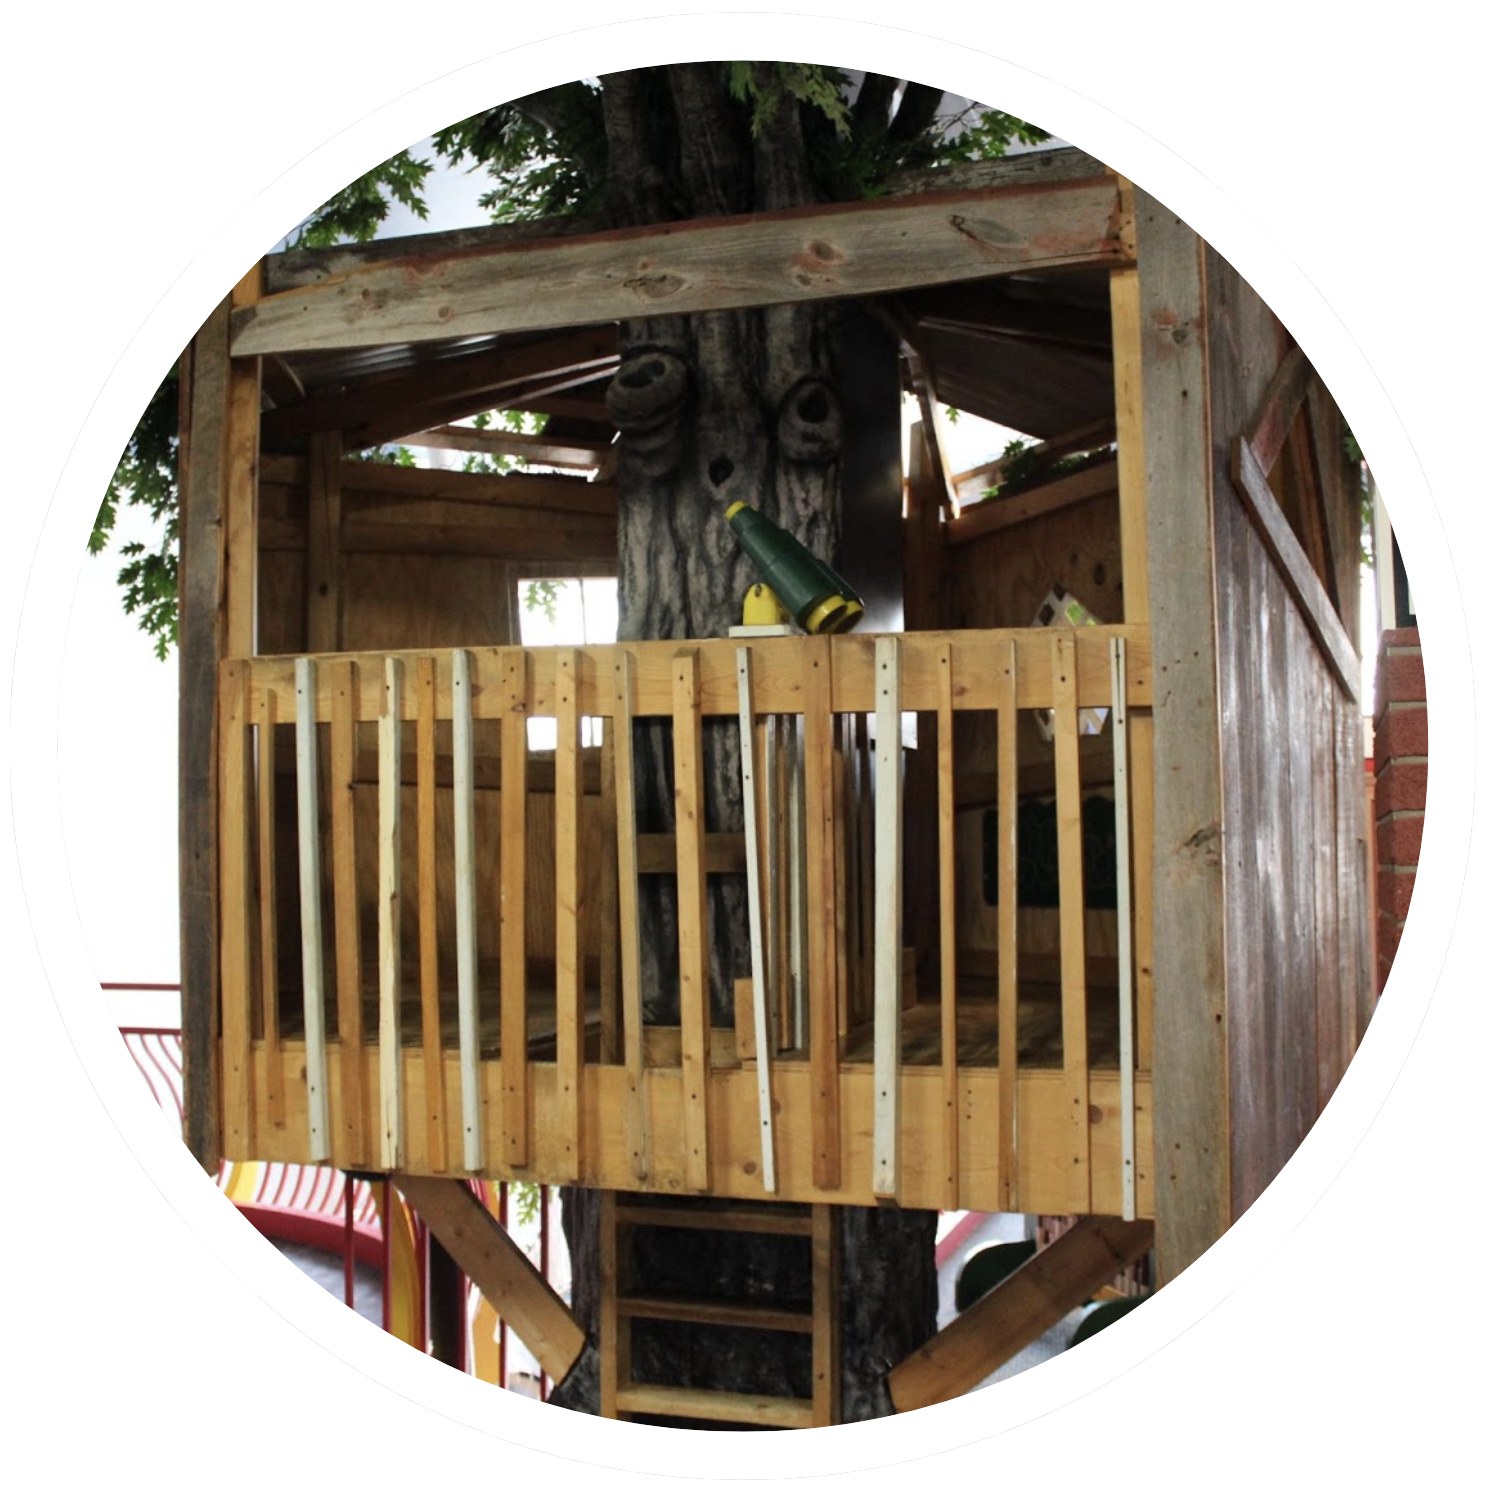 Clickable icon leading to Treehouse exhibit